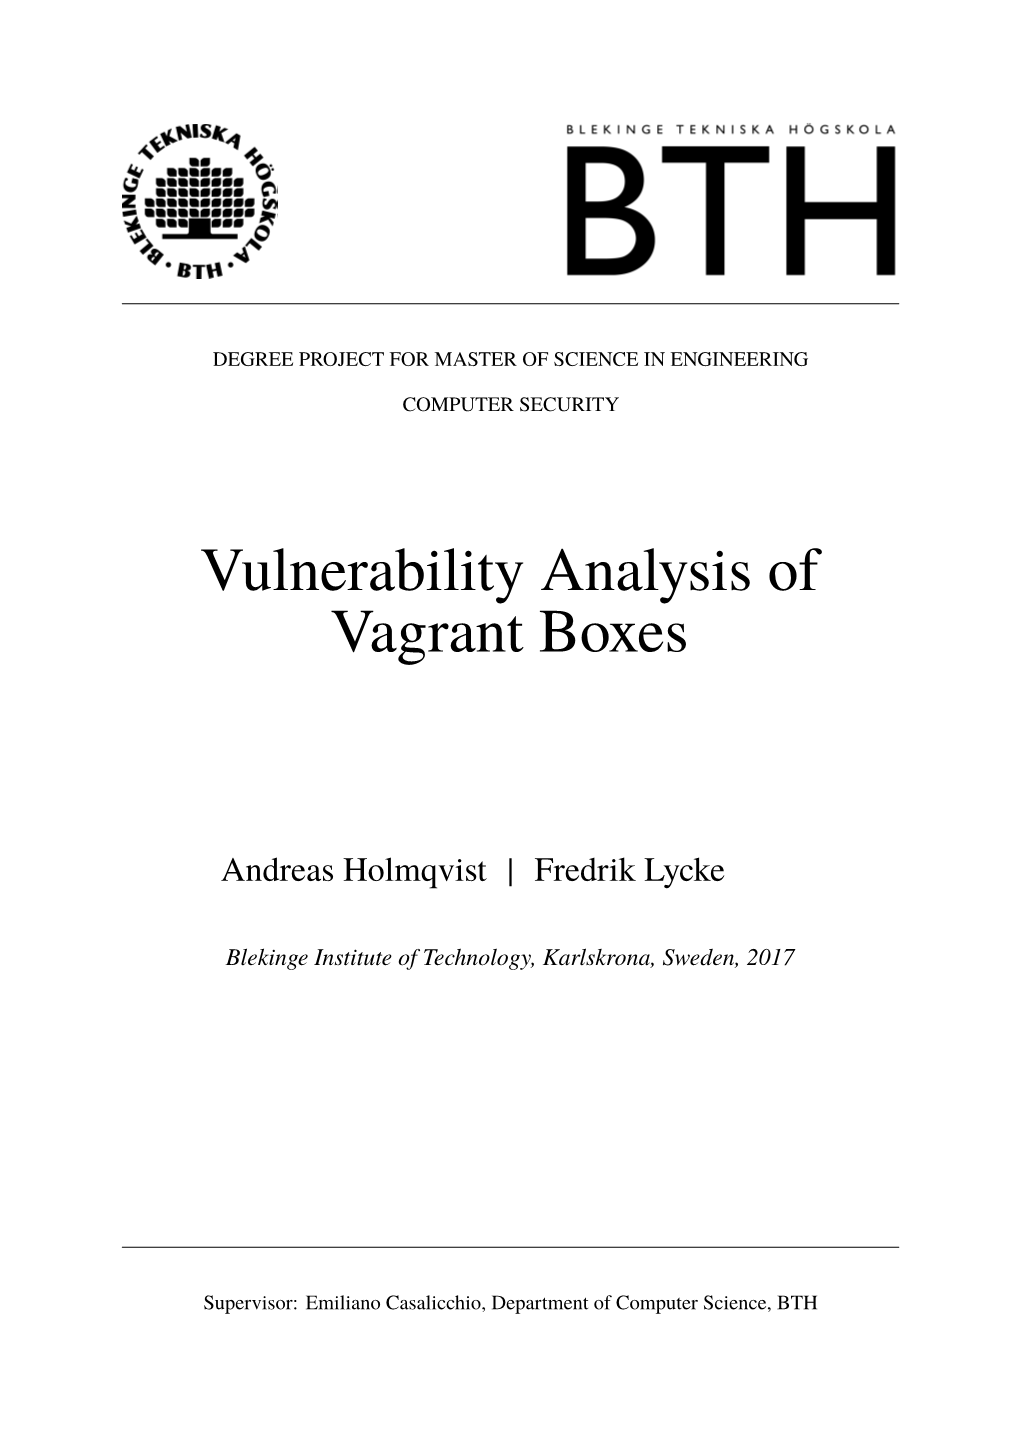 Vulnerability Analysis of Vagrant Boxes